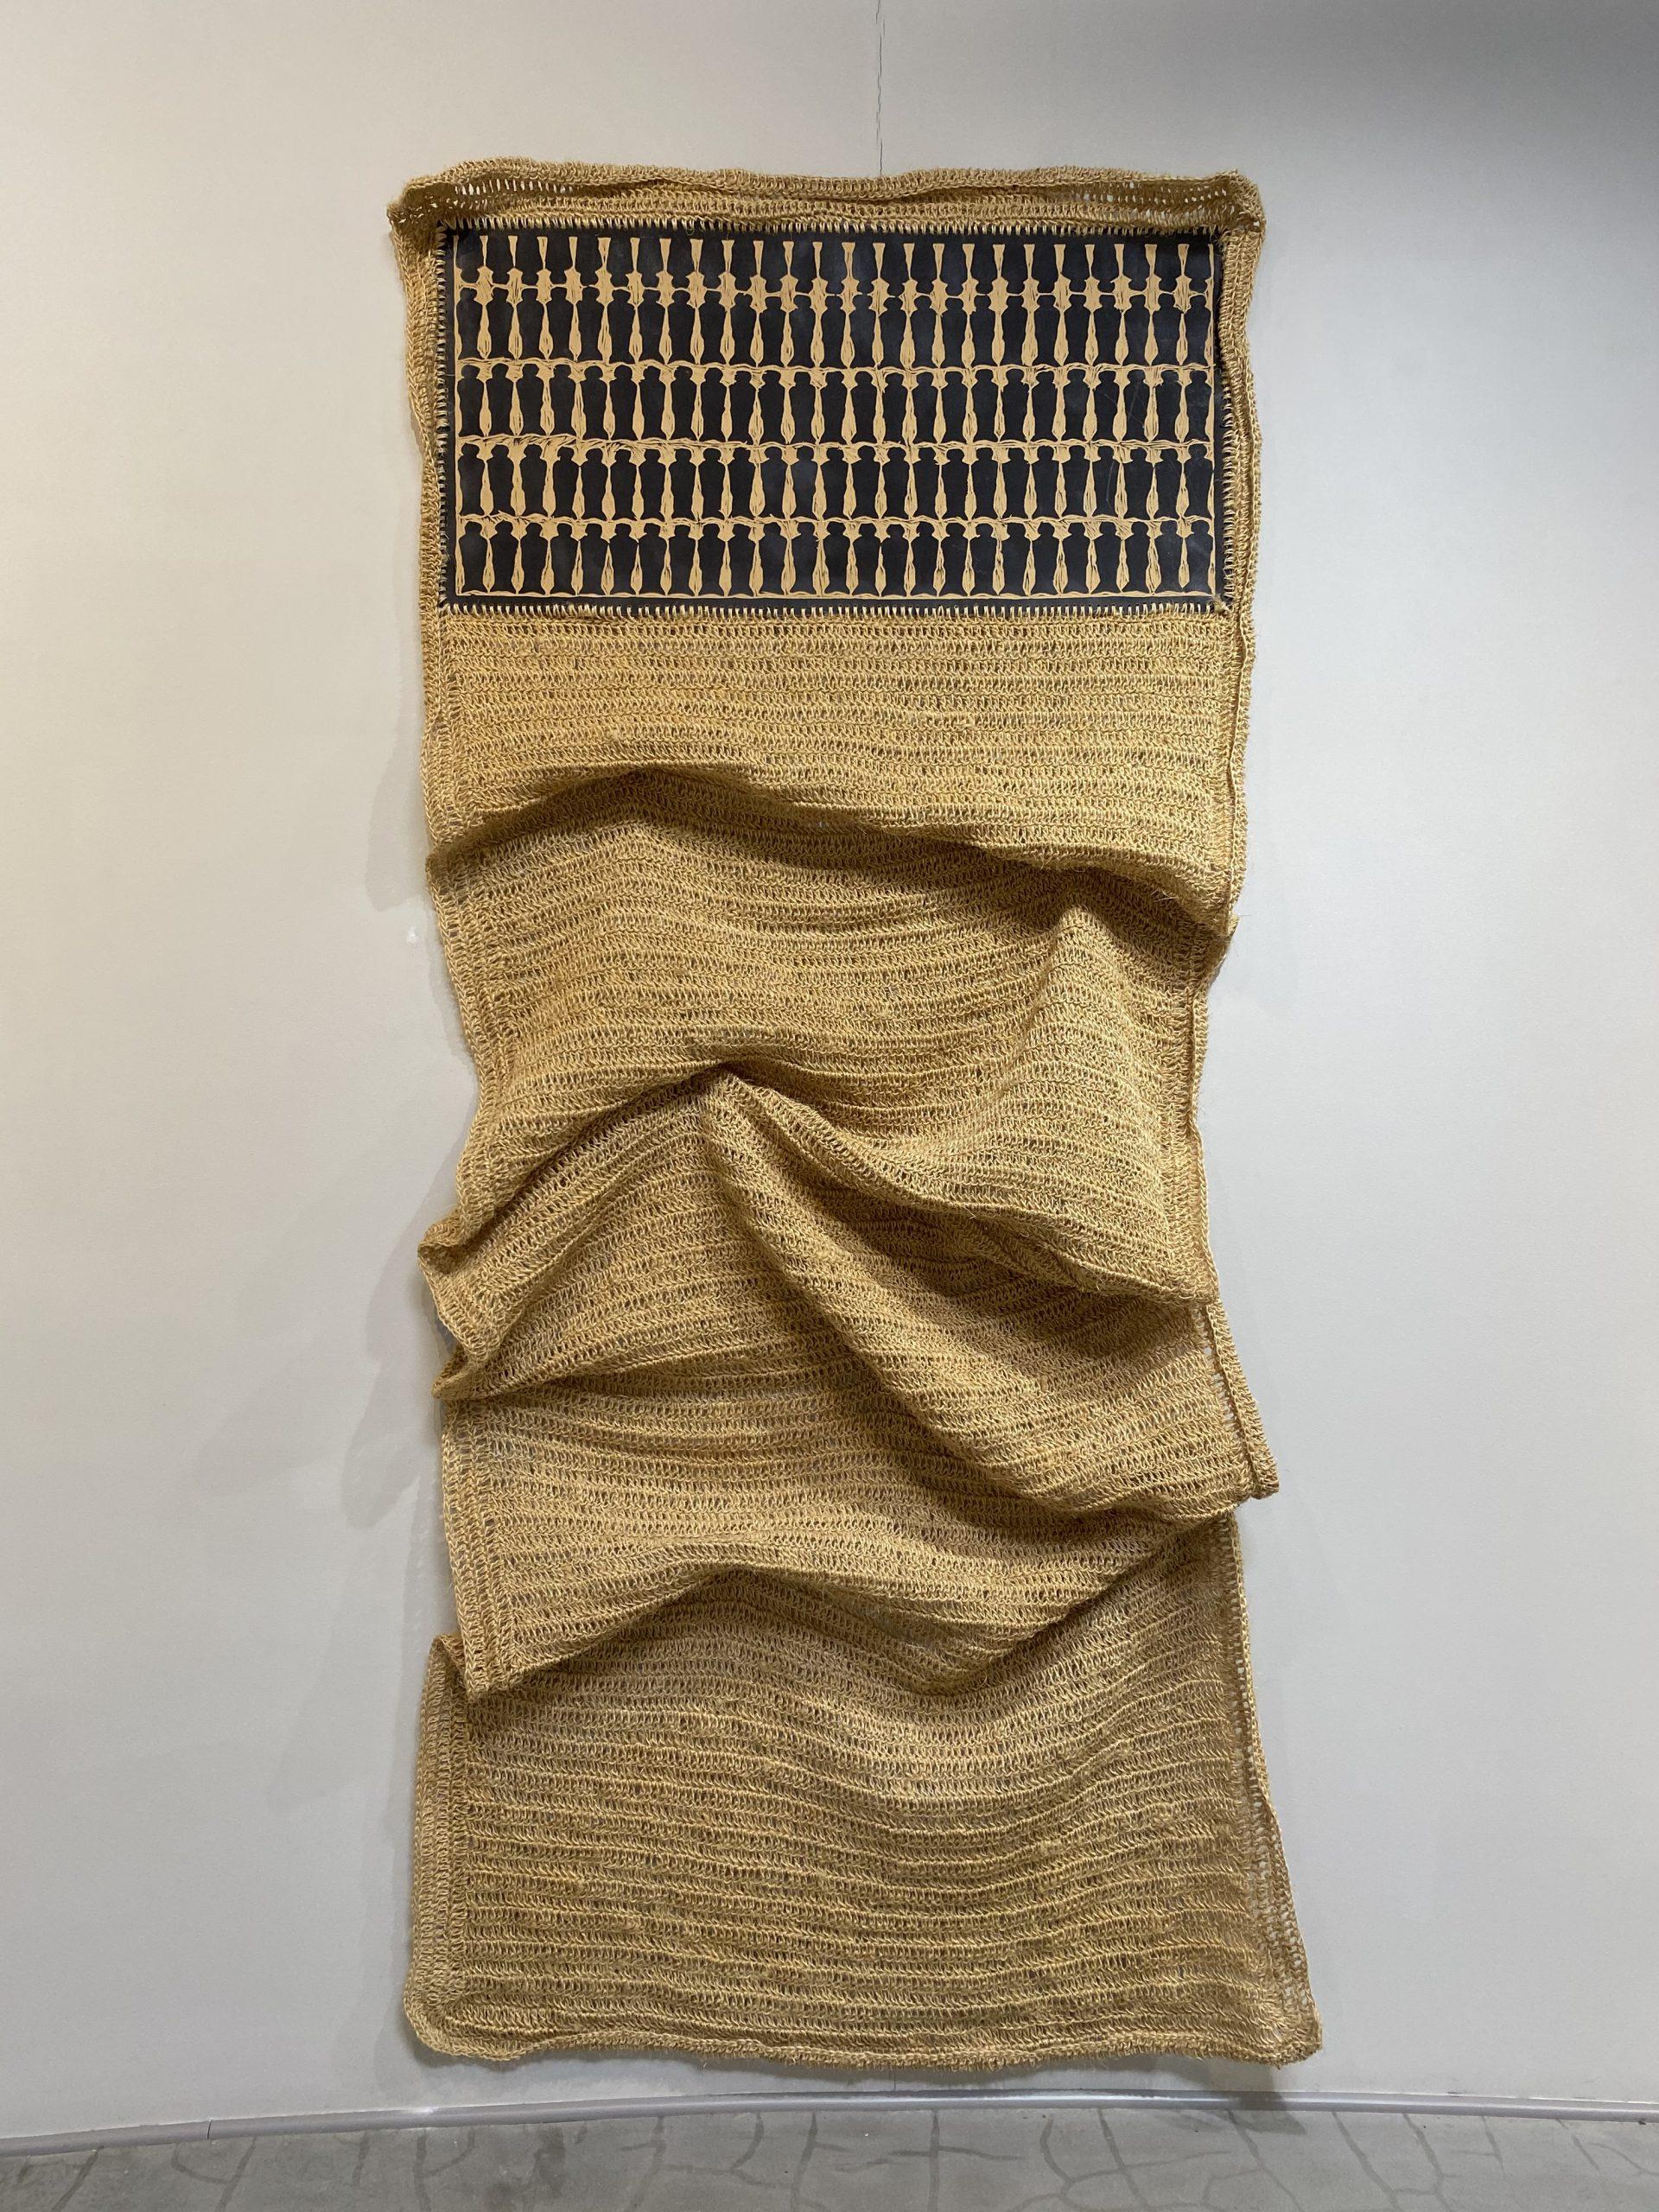 Tradition - Hand Crocheted Wood, Twine, and Ink Wall Hanging - Sculpture by Stephen Hayes